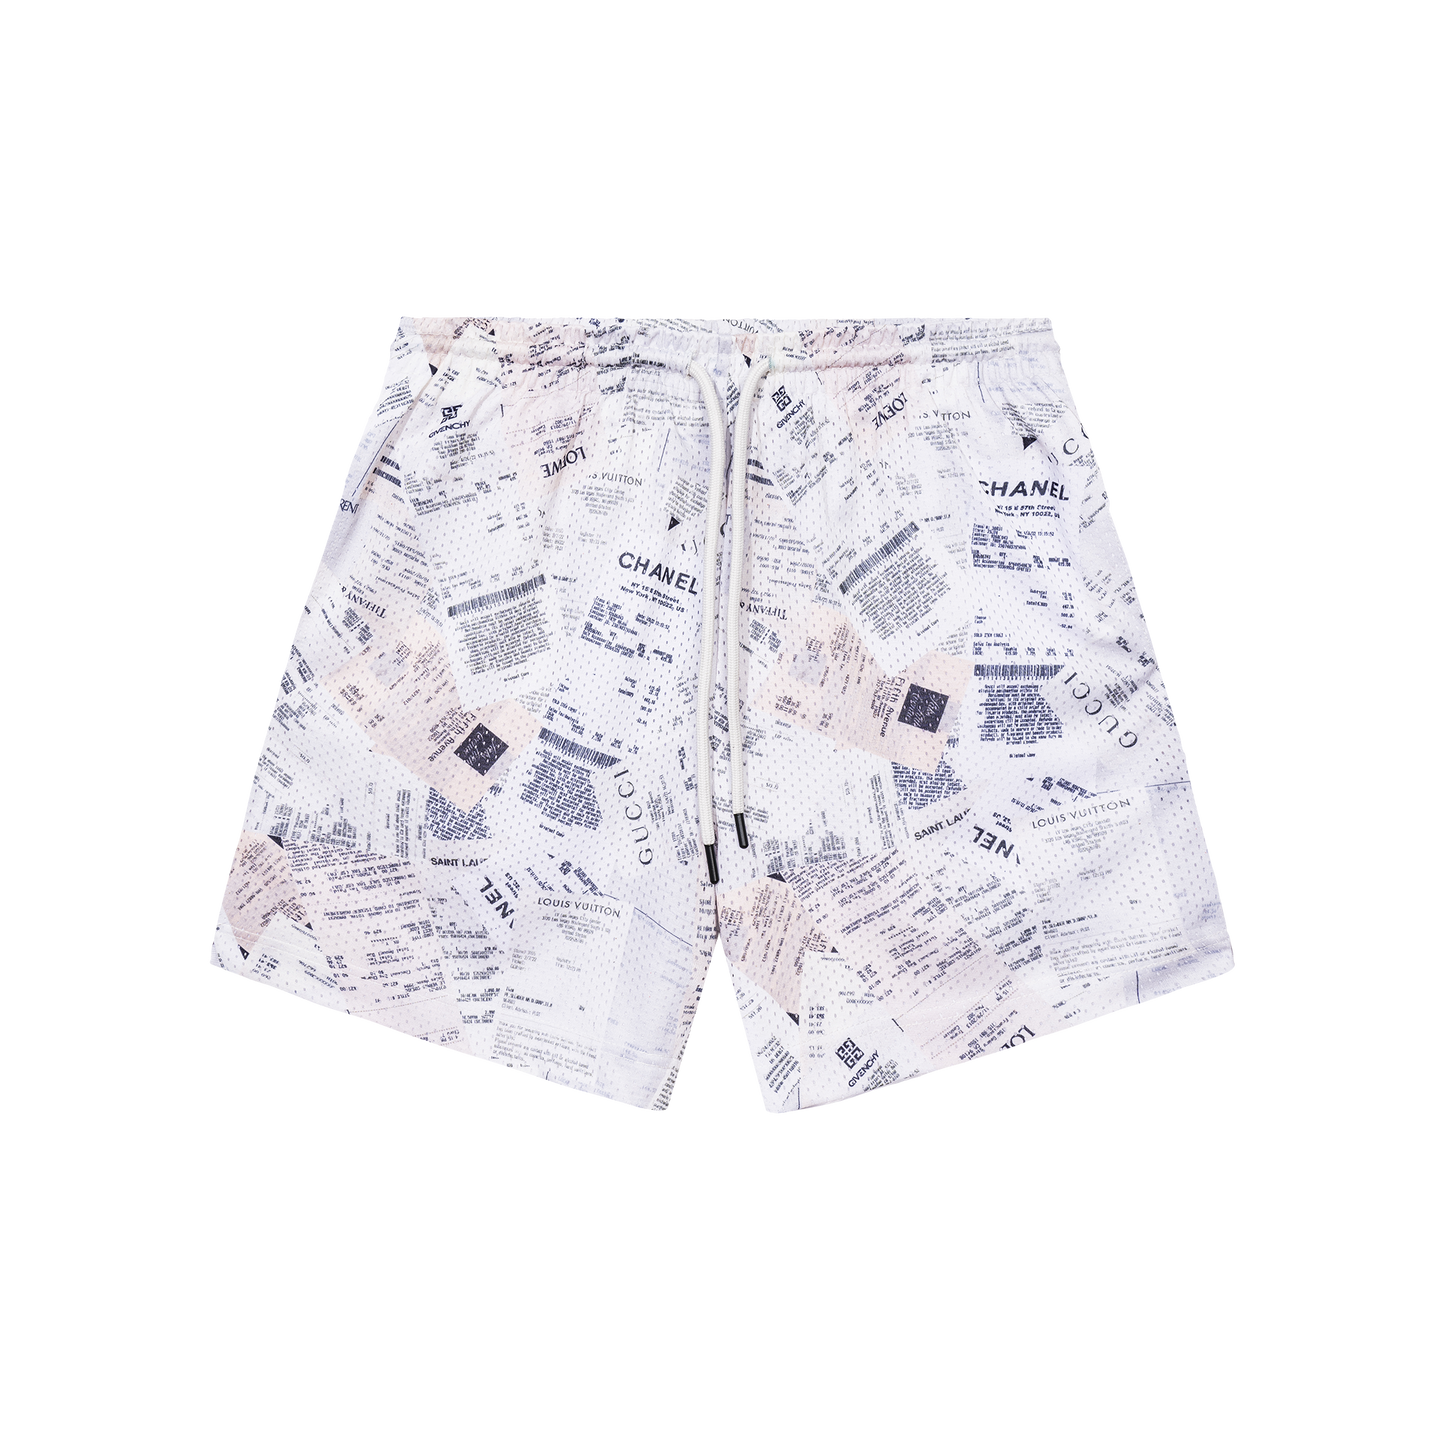 MARKET clothing brand SC DESIGNER RECEIPTS MESH SHORTS. Find more graphic tees, sweatpants, shorts and more bottoms at MarketStudios.com. Formally Chinatown Market. 